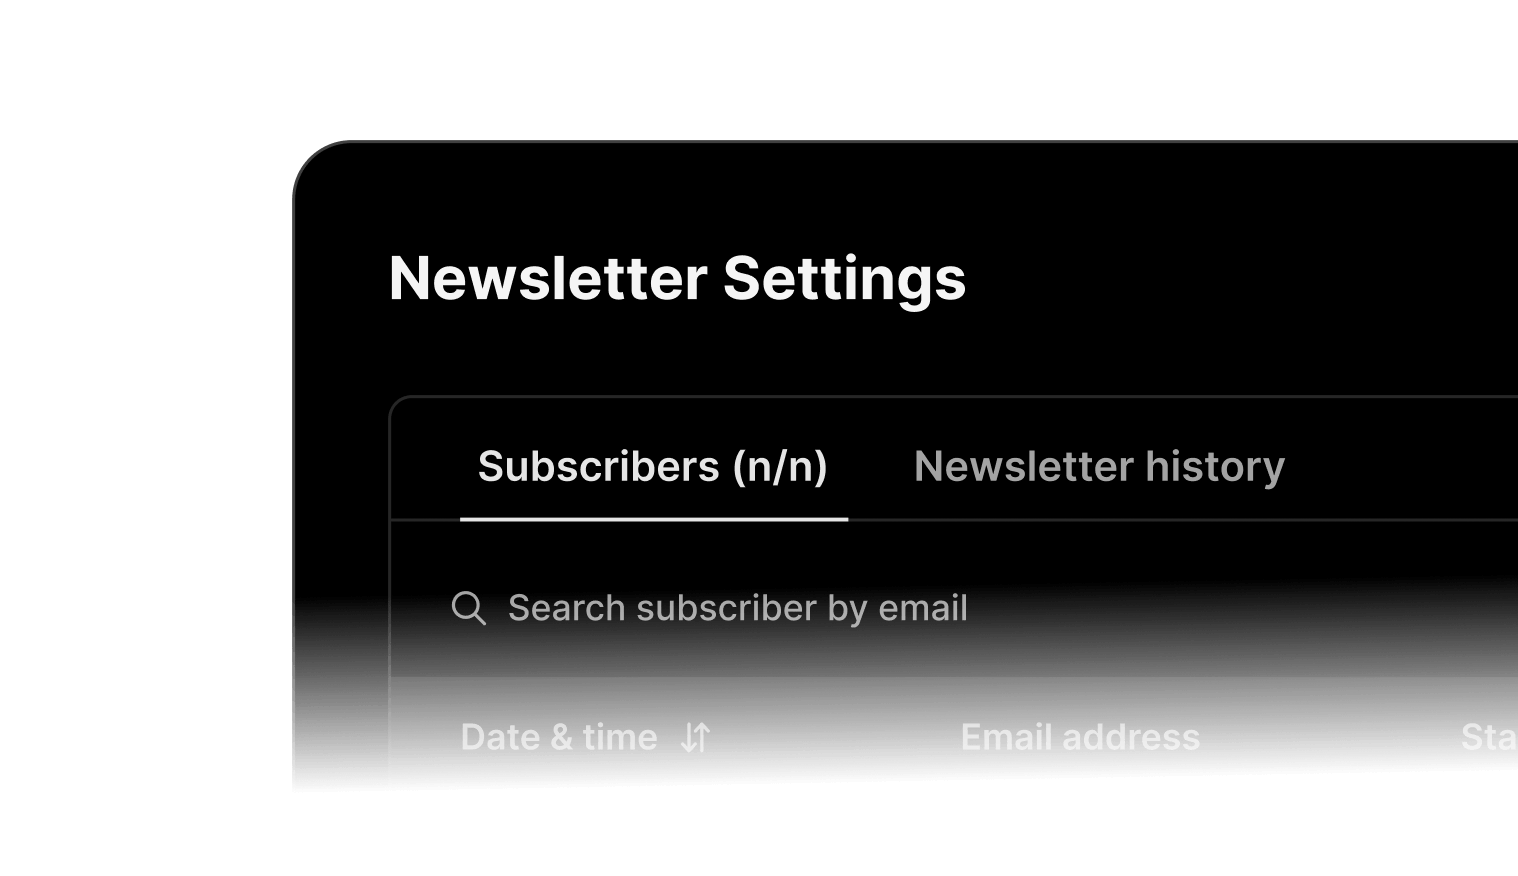 Built-in newsletter functionality.